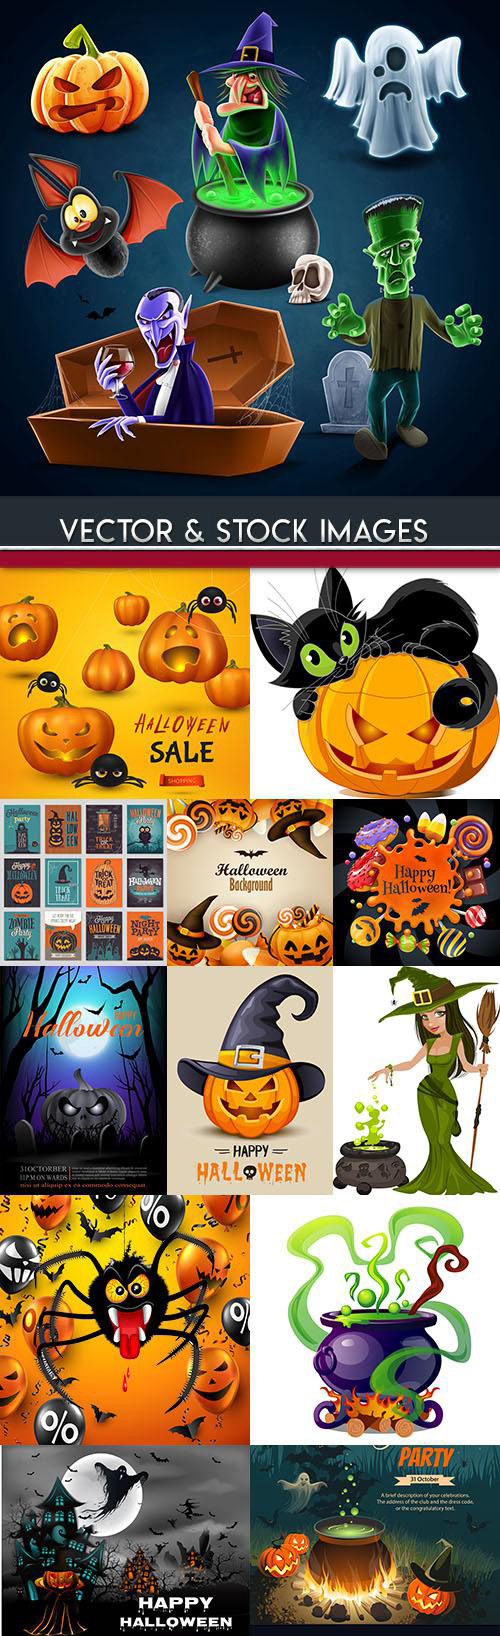 Happy Halloween holiday illustration collection 26